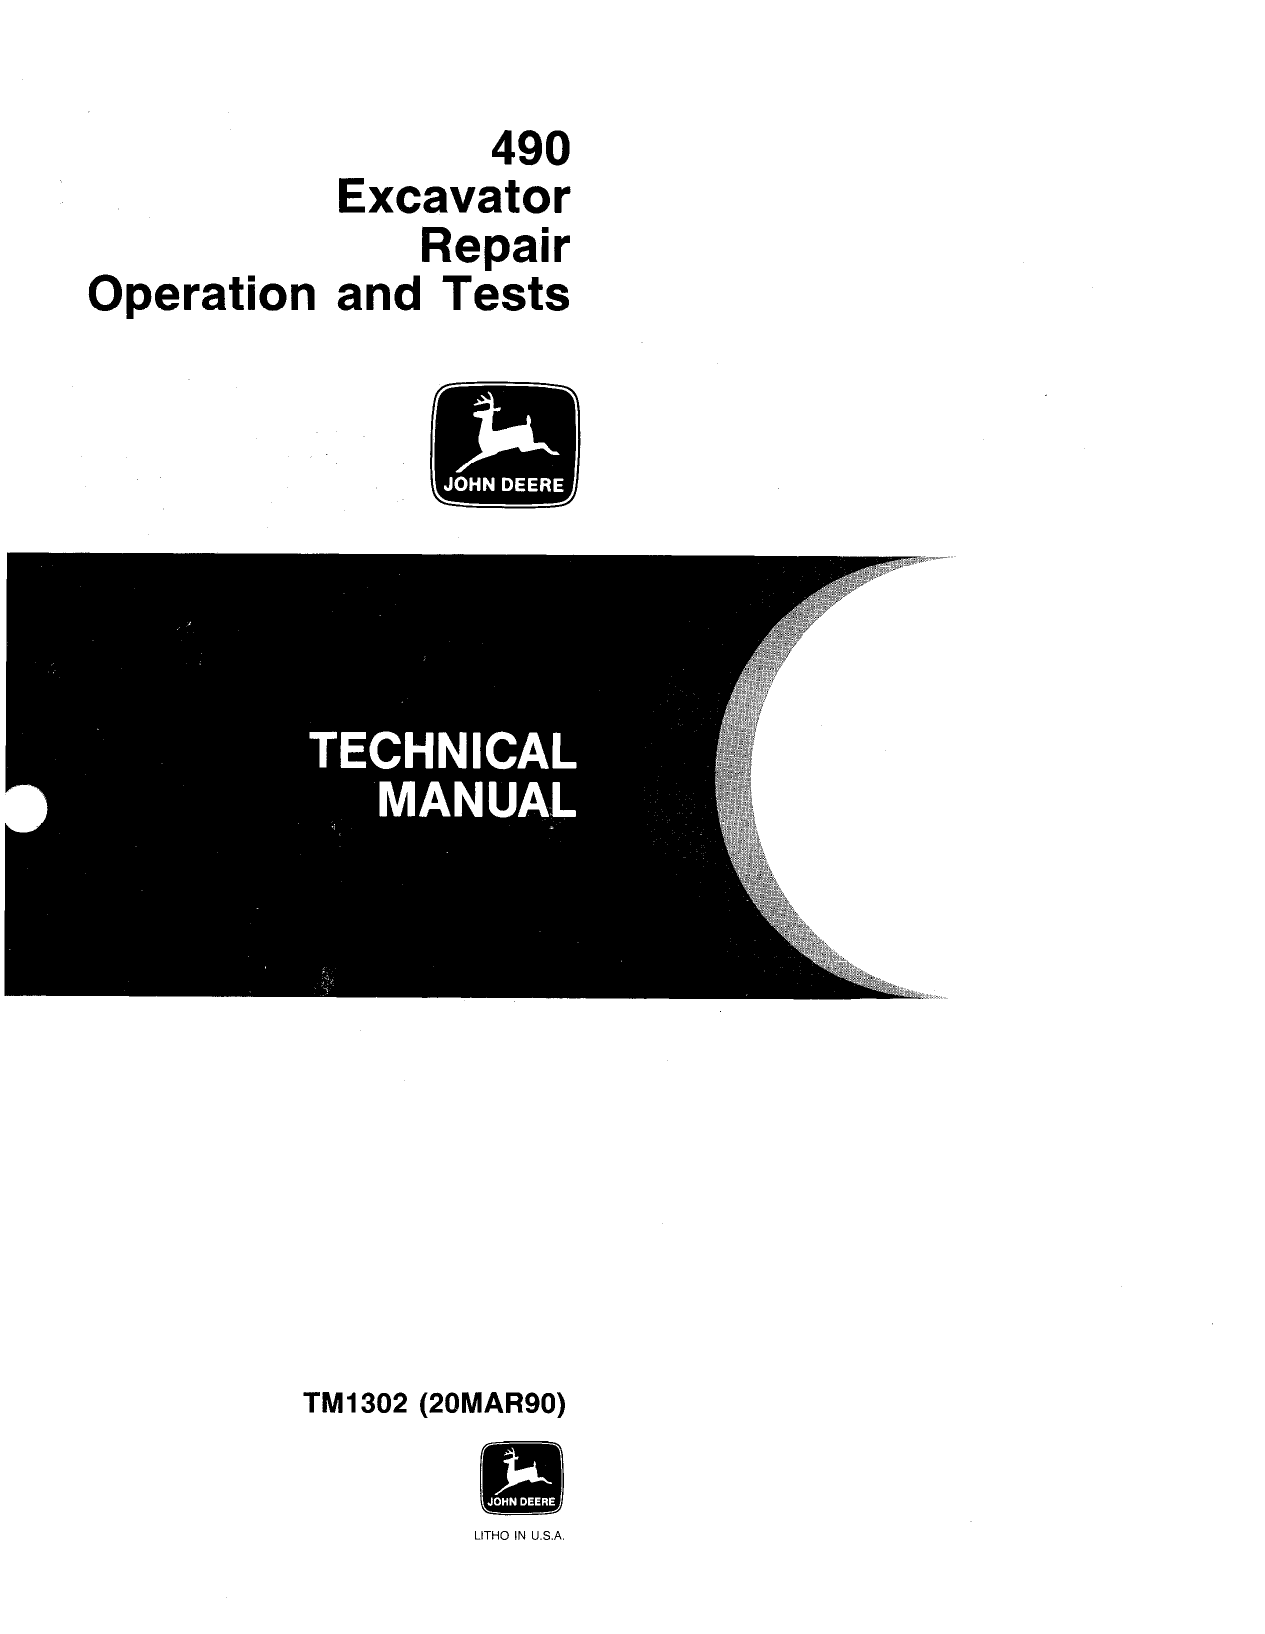 John Deere 490 Hydraulic Excavator technical manual Preview image 1